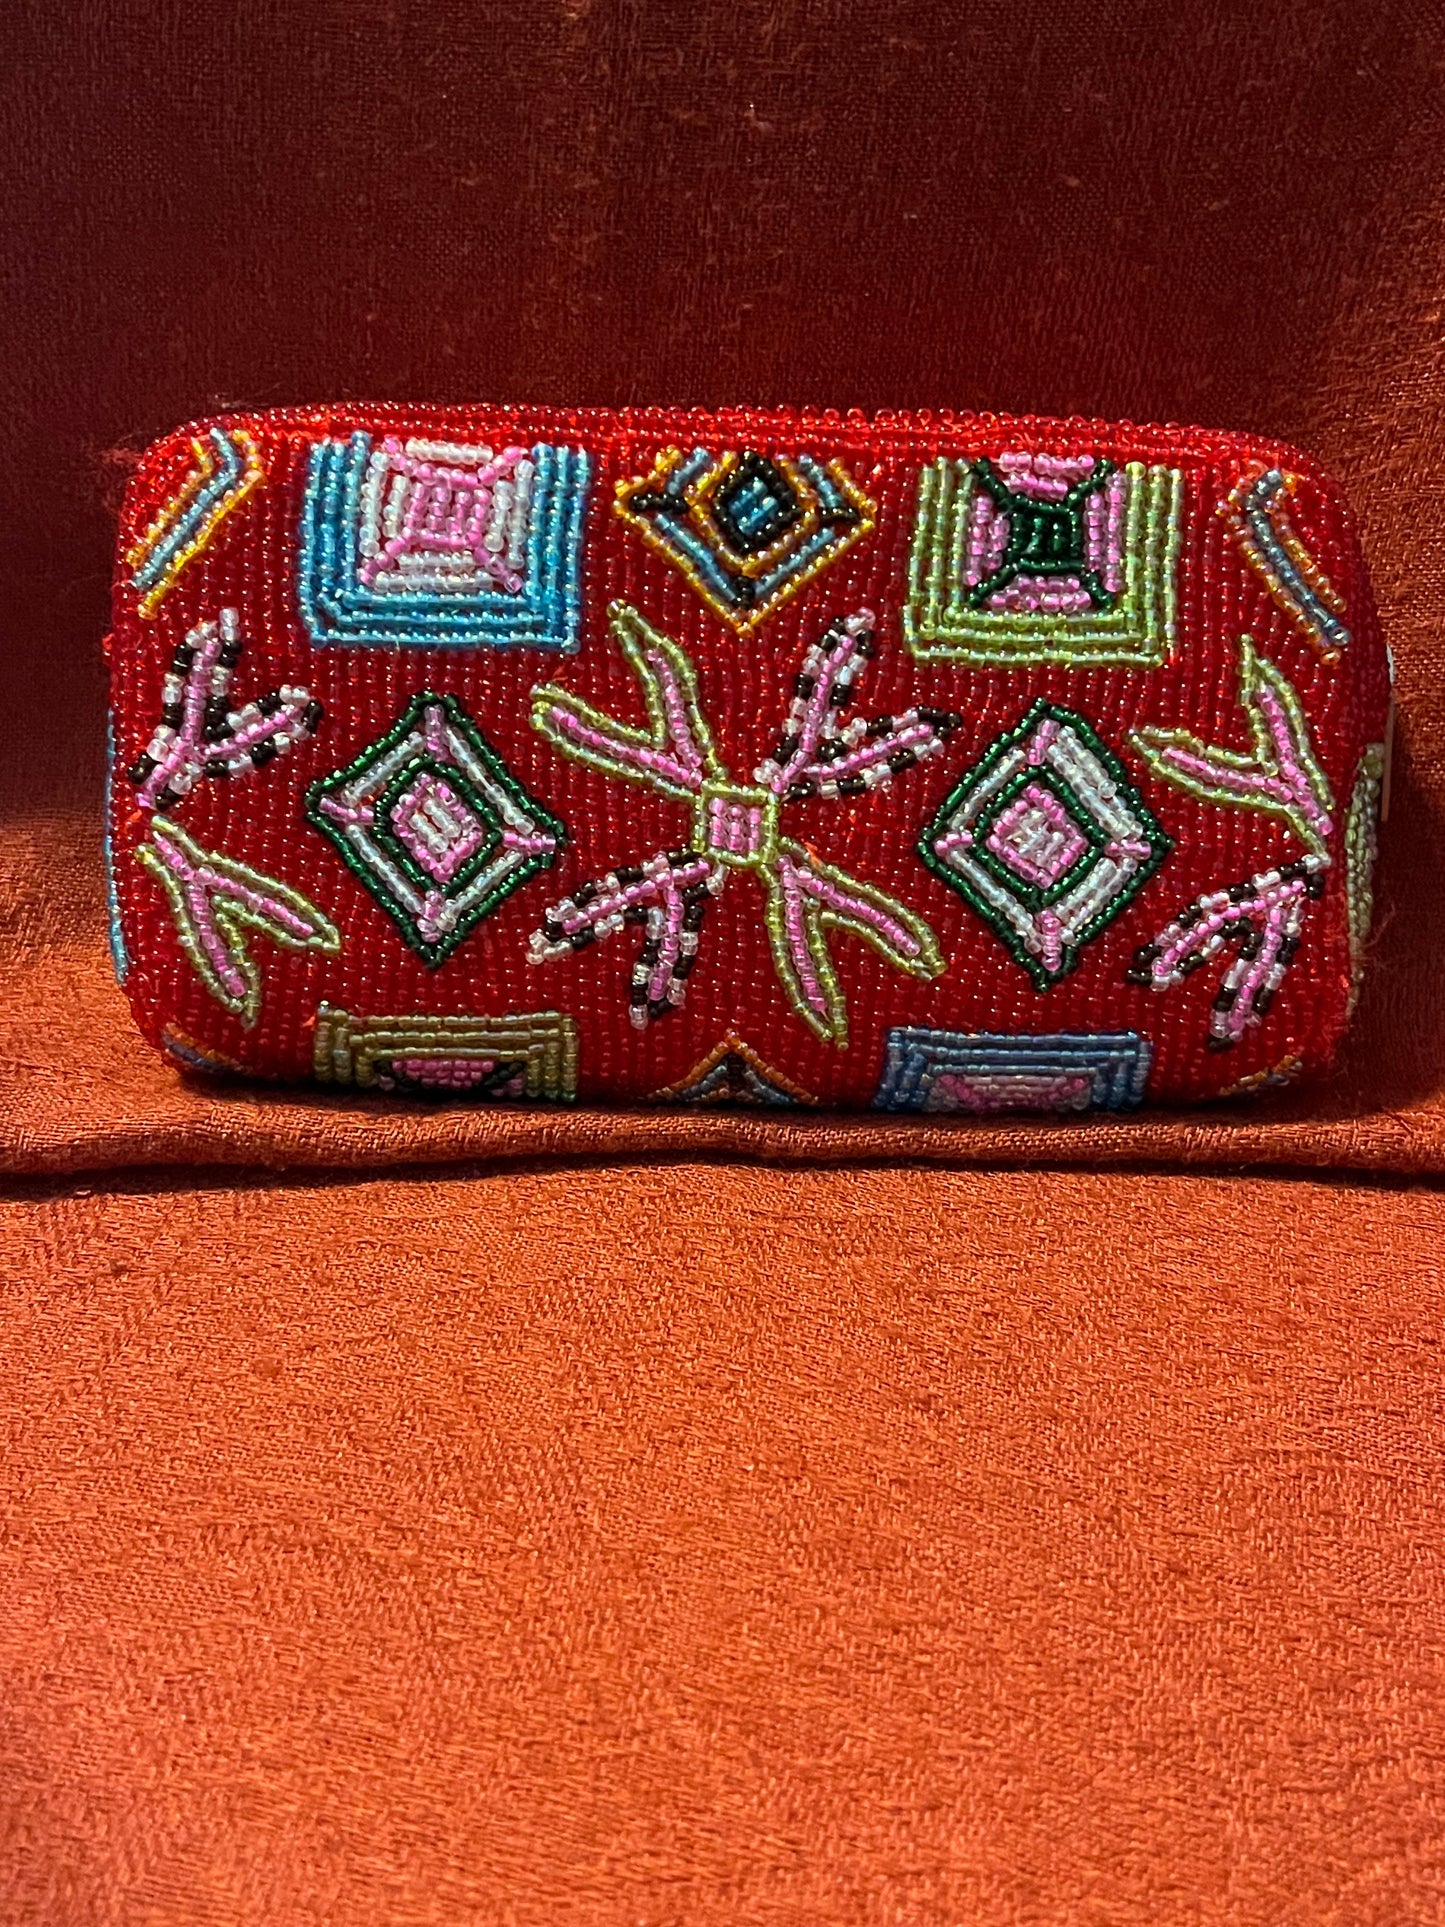 Red and Multi-colored Beaded Evening Clutch or Accessory Bag